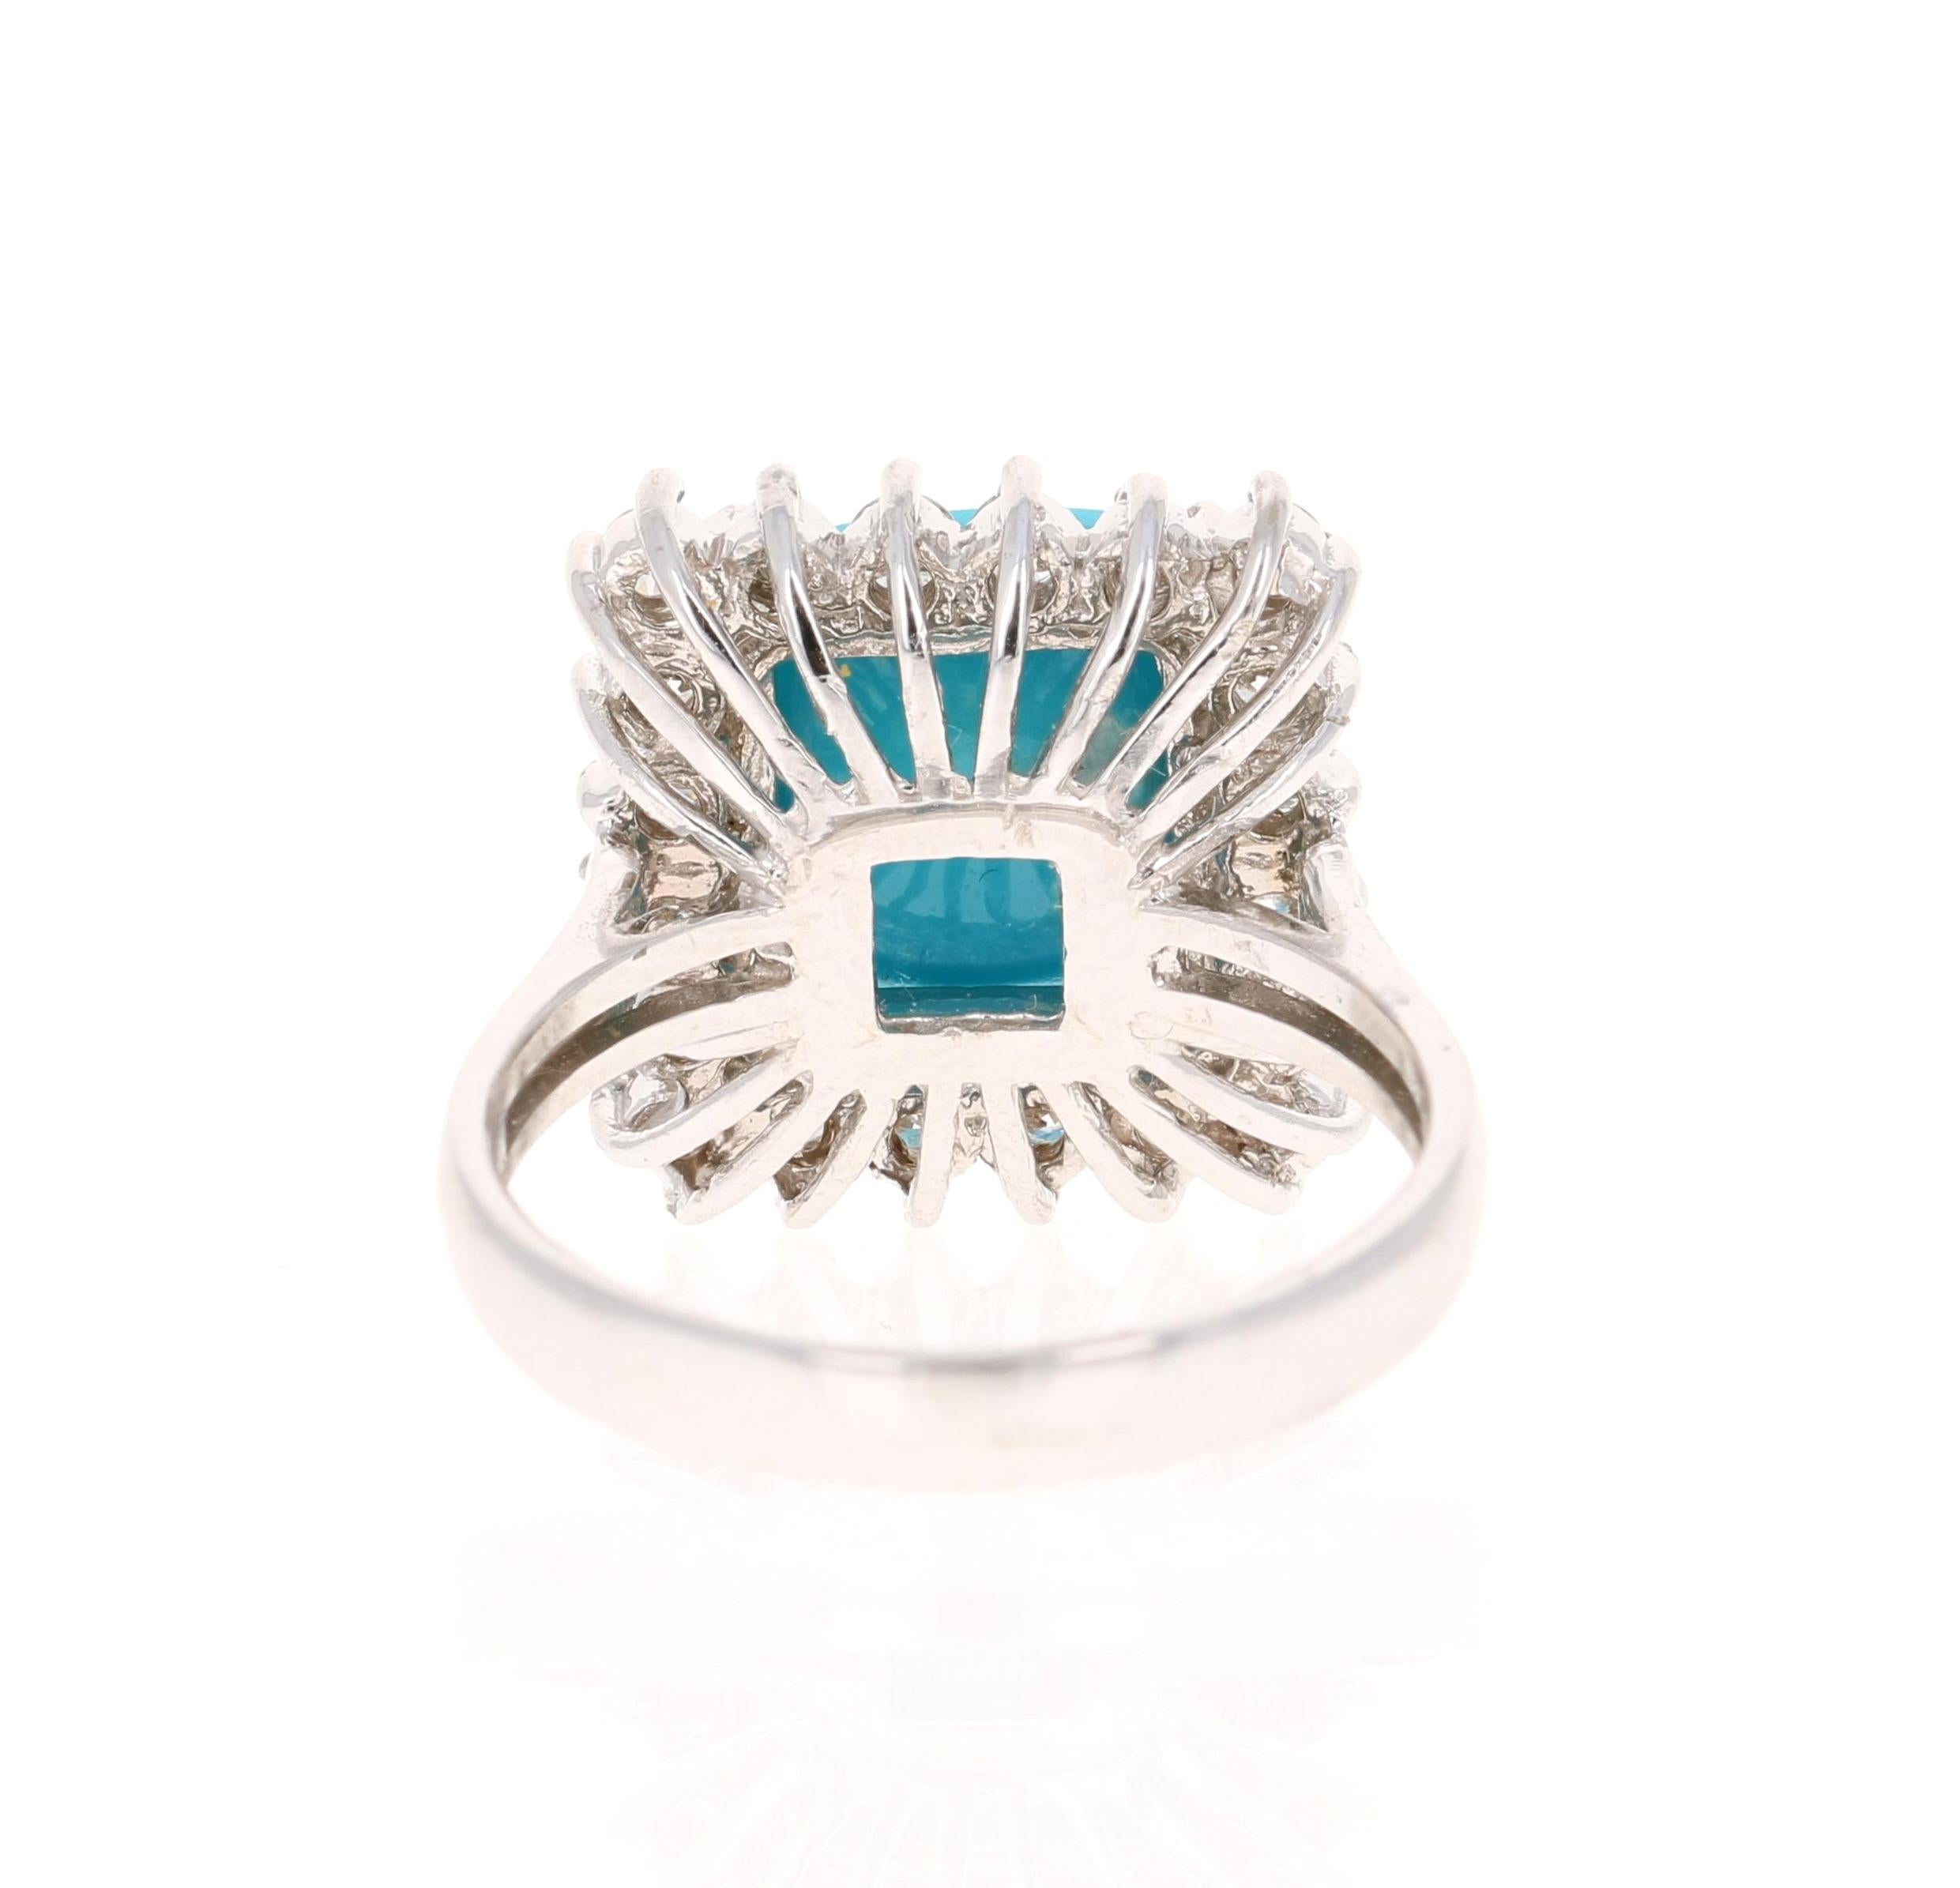 Contemporary 5.71 Carat Turquoise Diamond 14 Karat White Gold Cocktail Ring For Sale